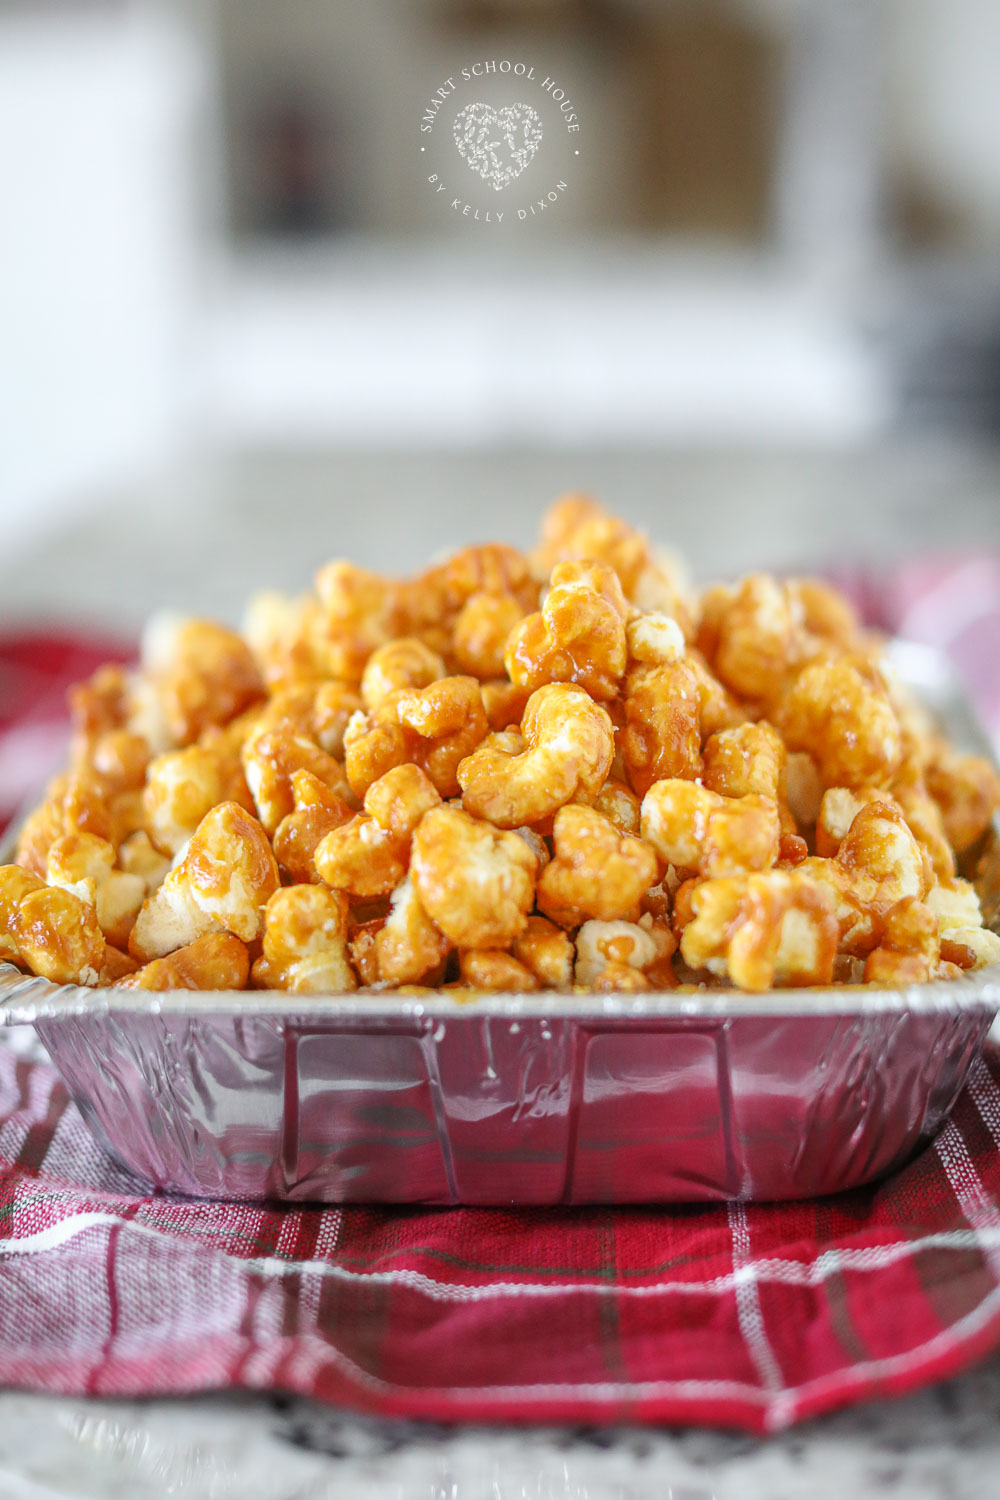 This Caramel Puff Corn Recipe has bigger kernels and more butter flavor than regular caramel corn - Great for movie night or homemade gifts!